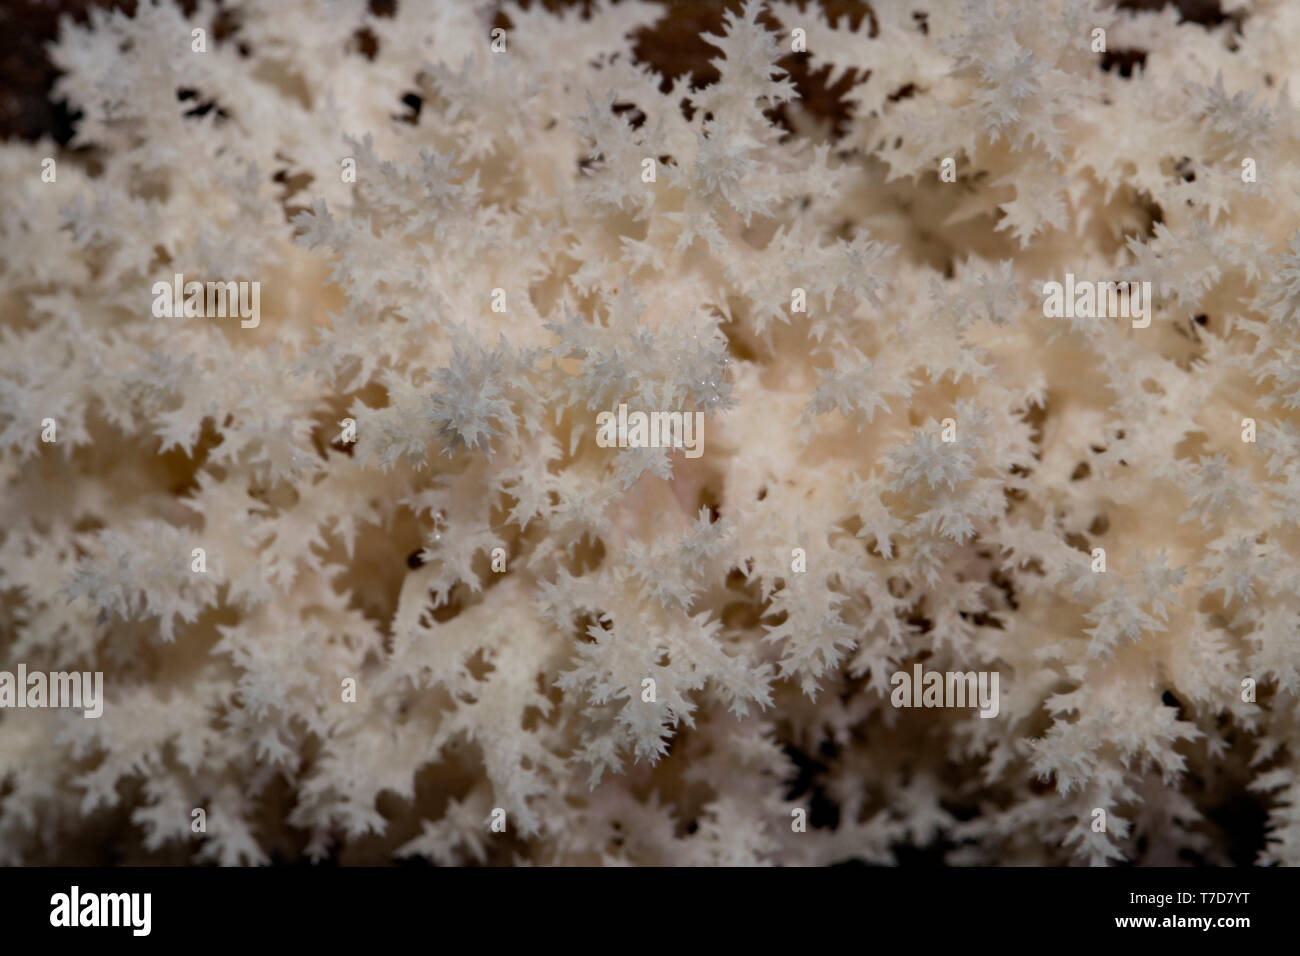 coral tooth fungus, (Hericium coralloides) Stock Photo